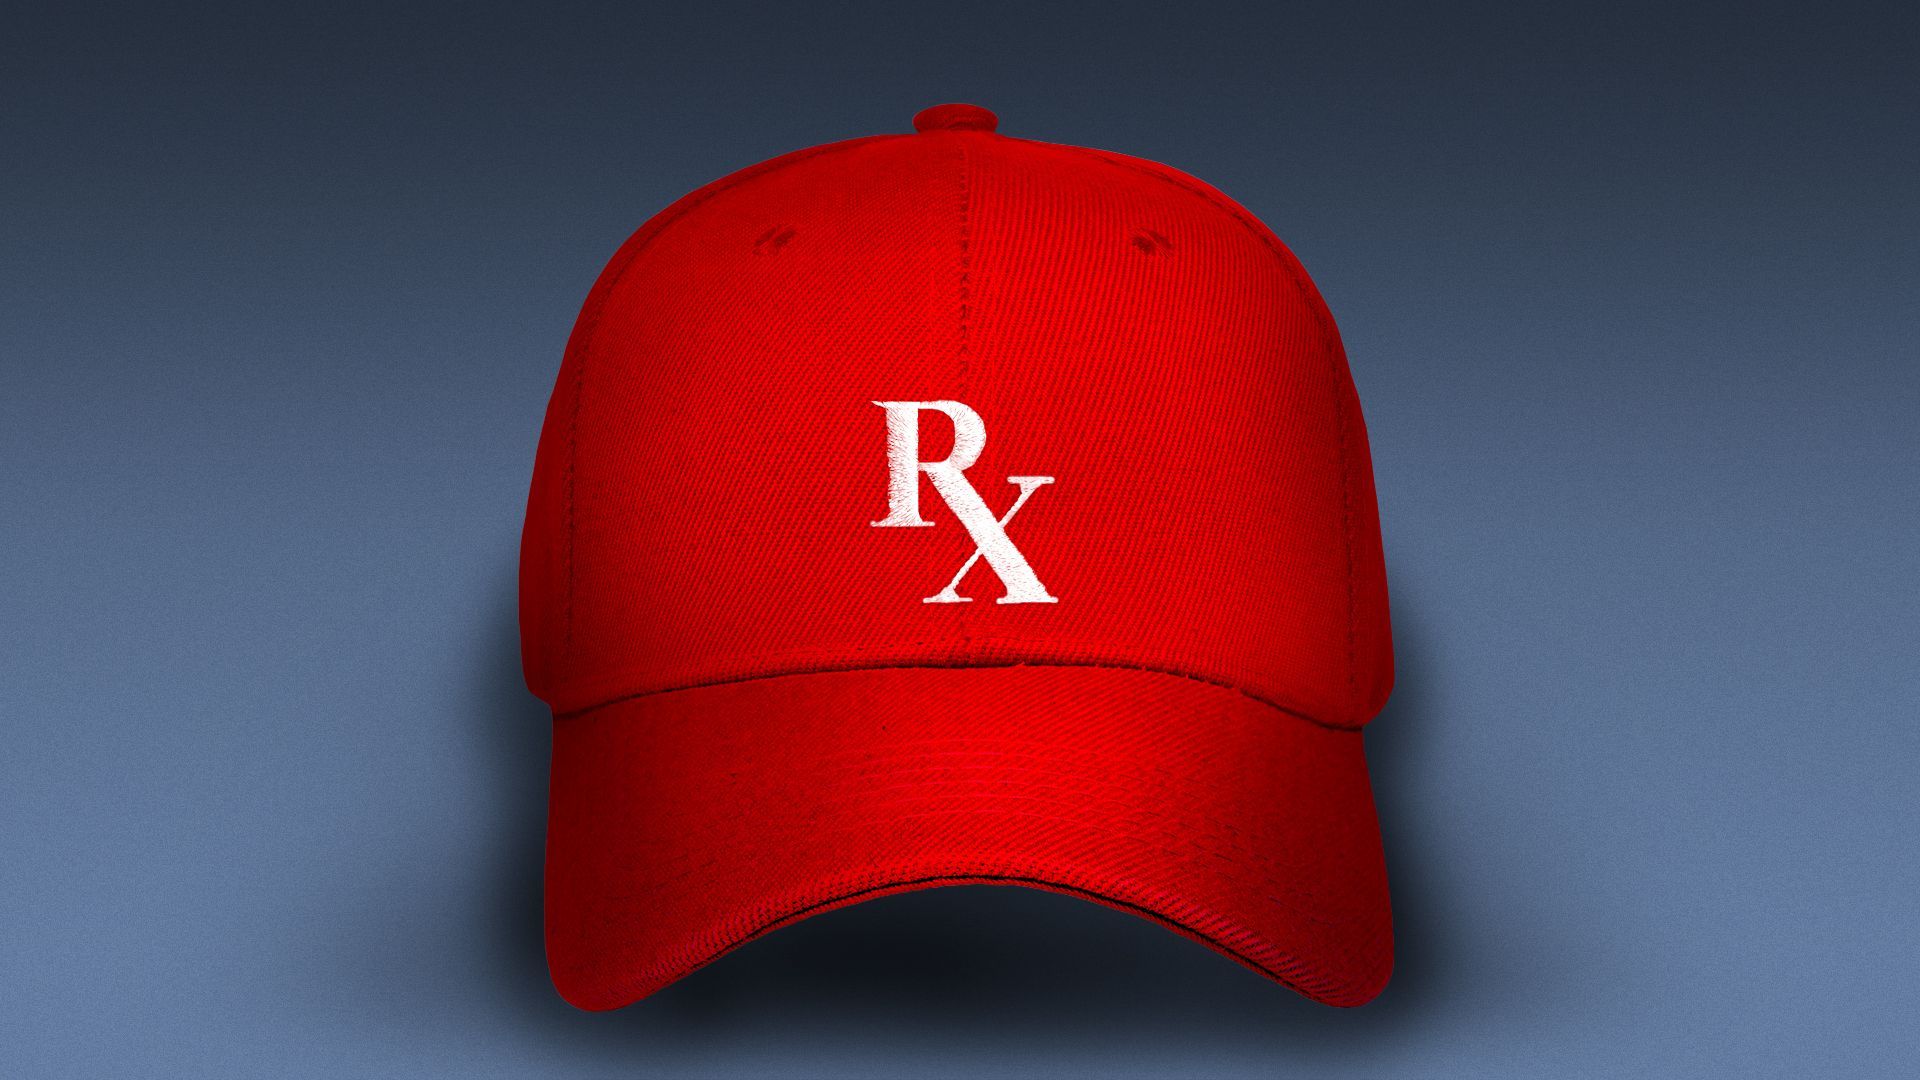 Illustration of a red MAGA-style hat with stitching that reads "Rx".